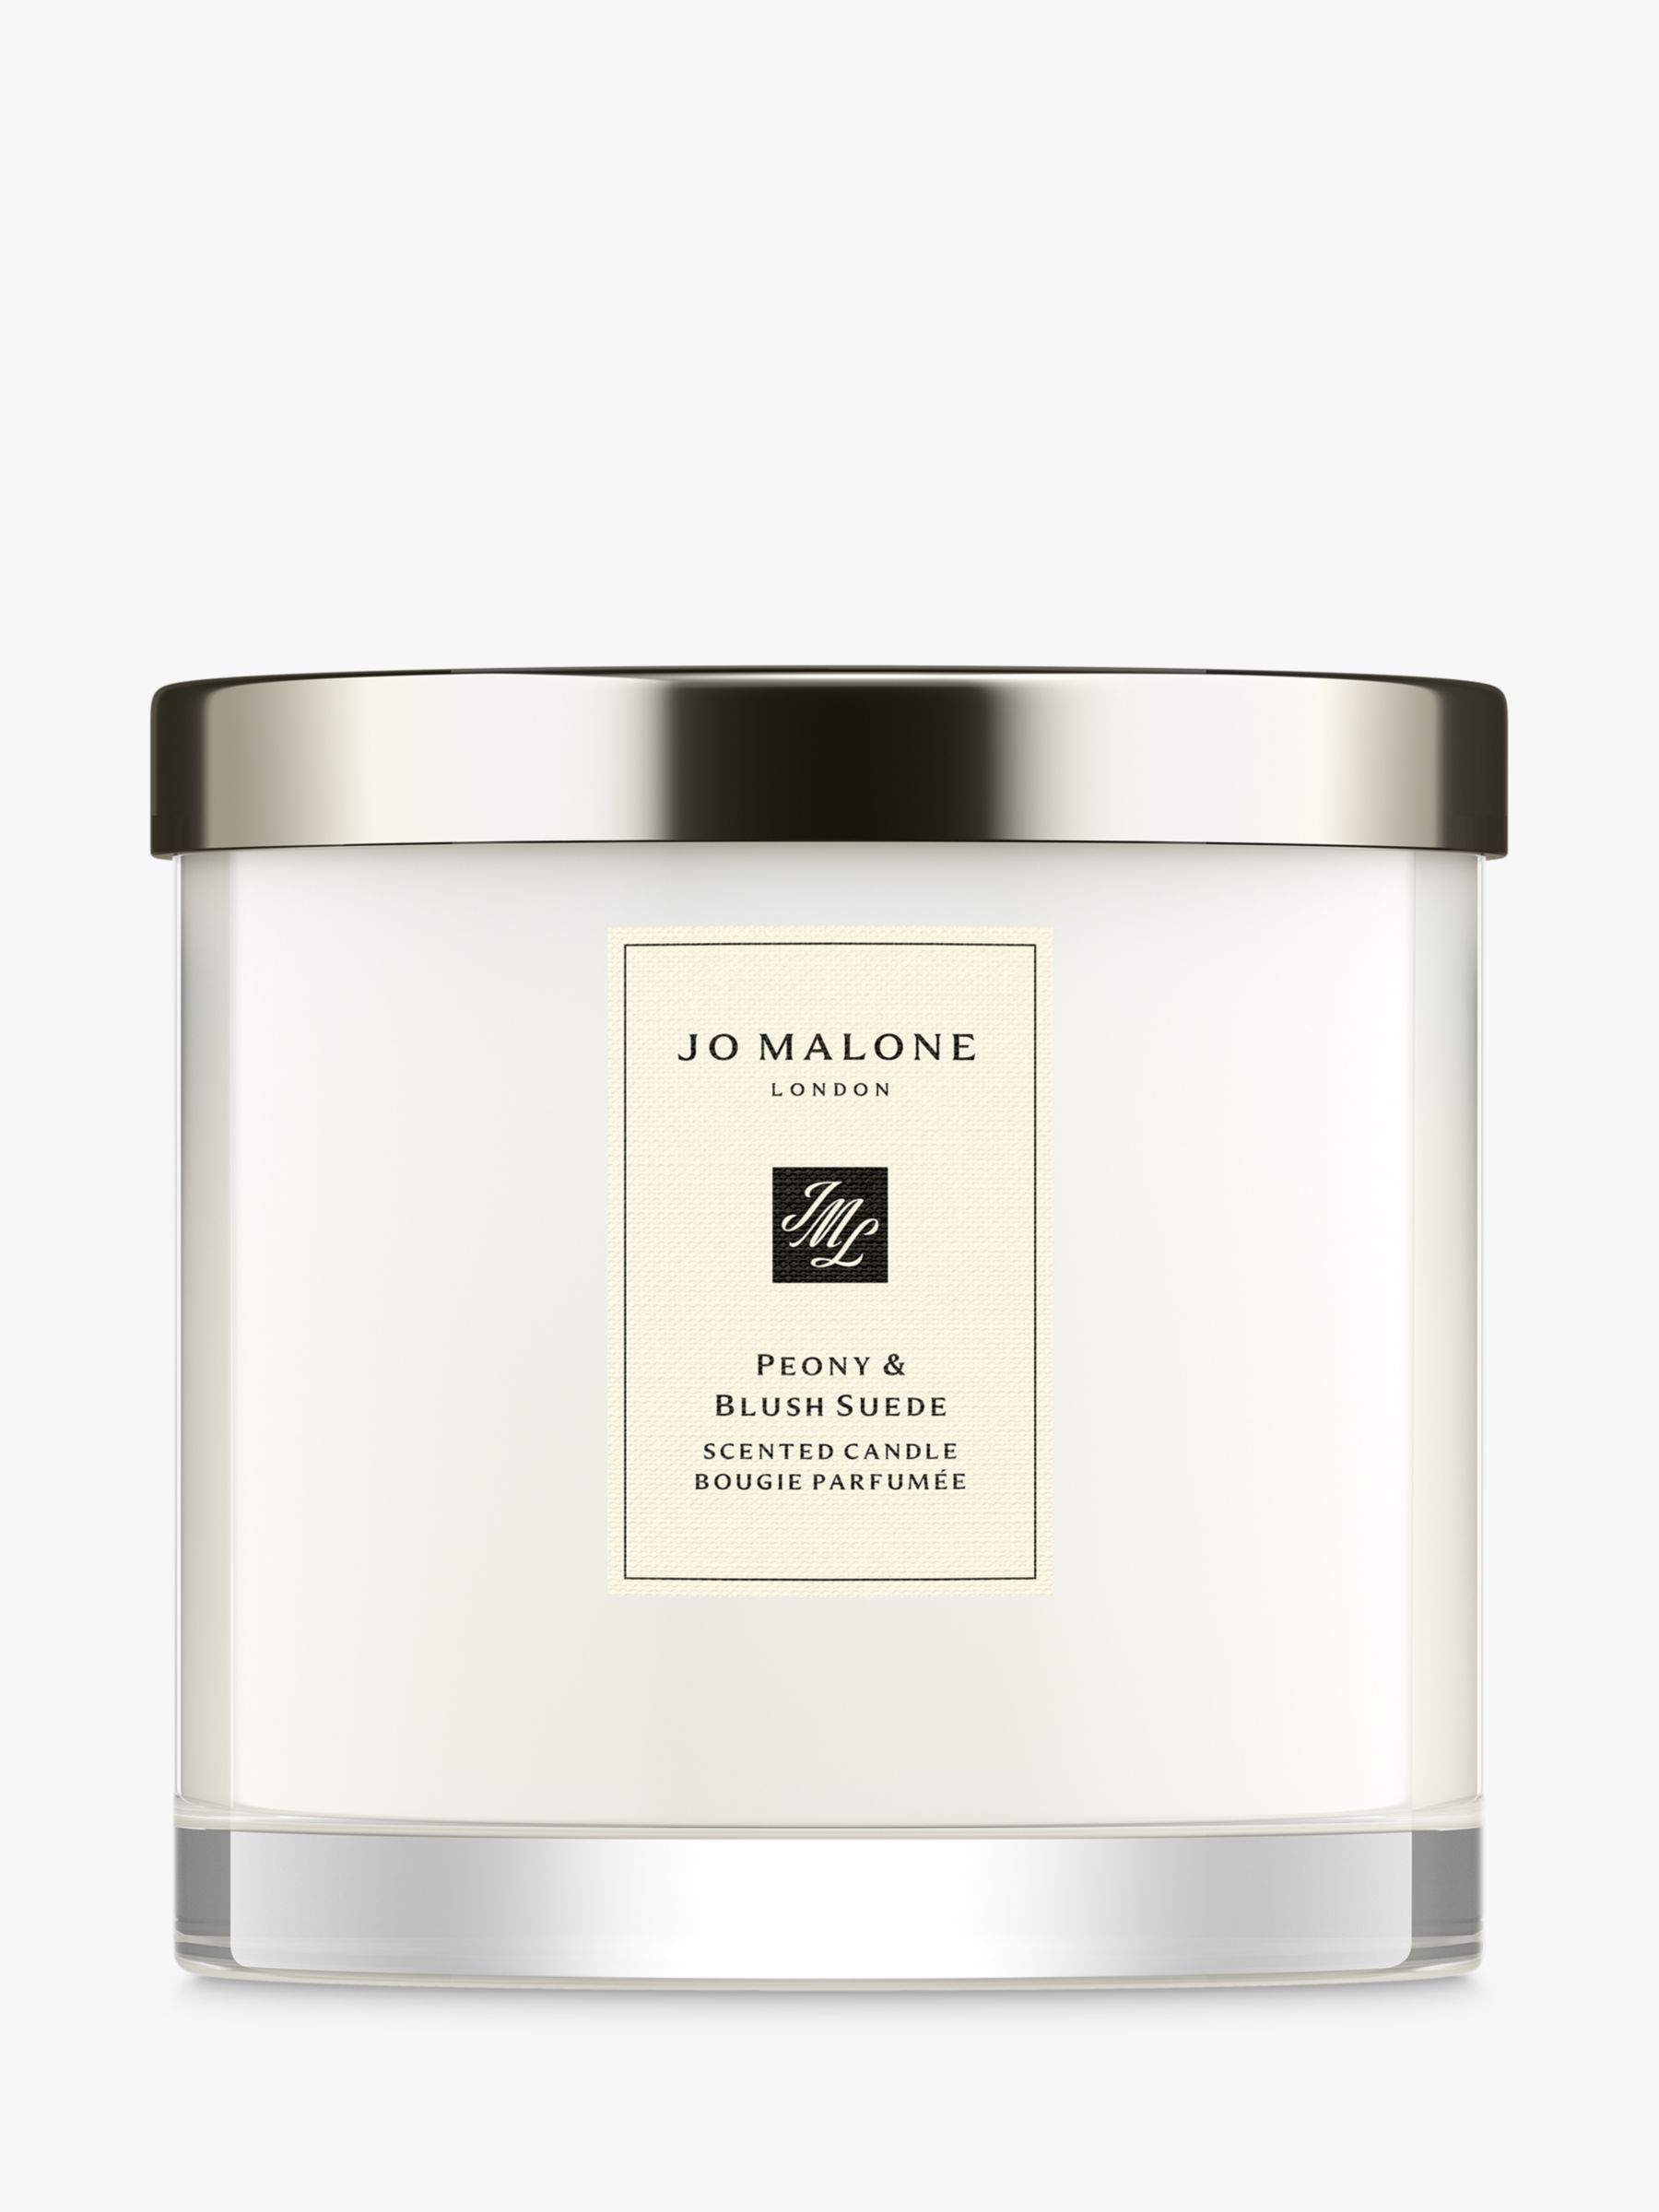 Jo Malone London Peony & Blush Suede Deluxe Candle, 600g at John Lewis